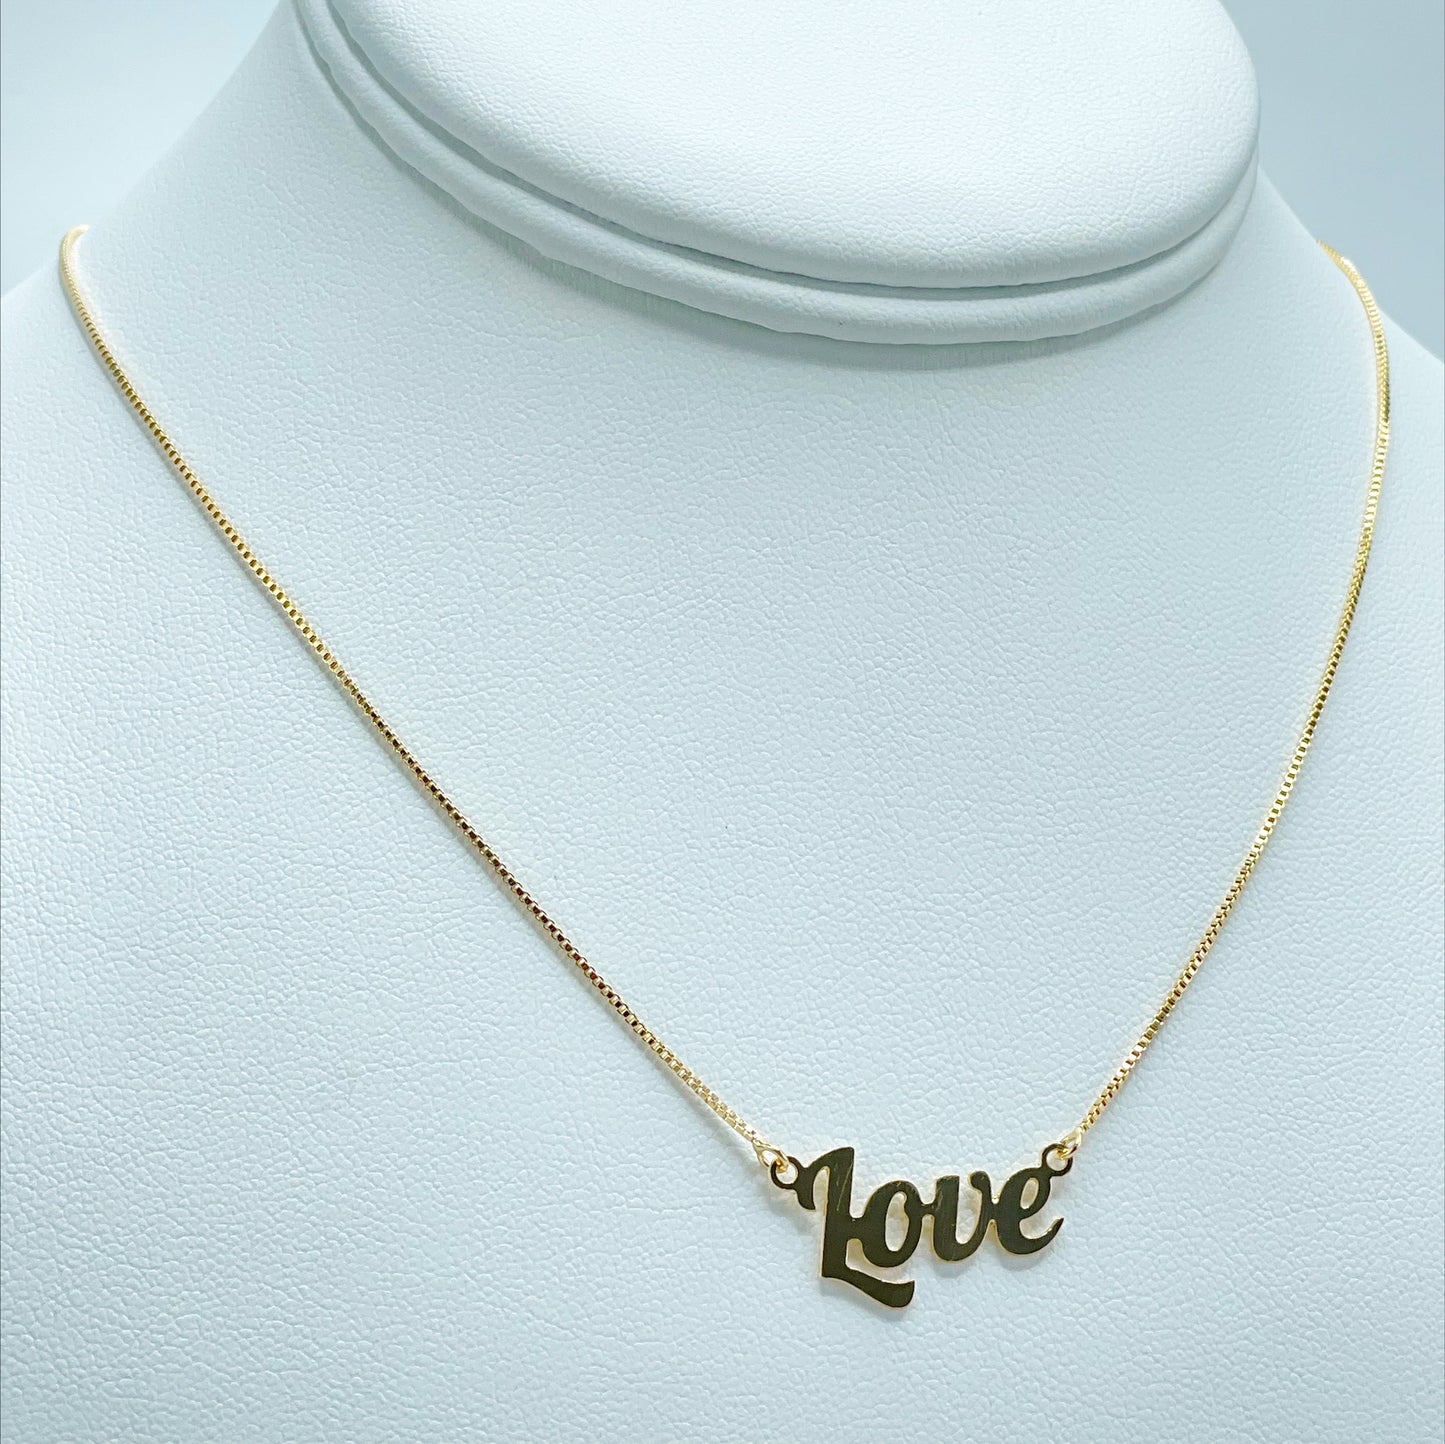 18k Gold Filled 1mm Box Chain Necklace with "LOVE" Word Letters Charm, Wholesale Jewelry Making Supplies